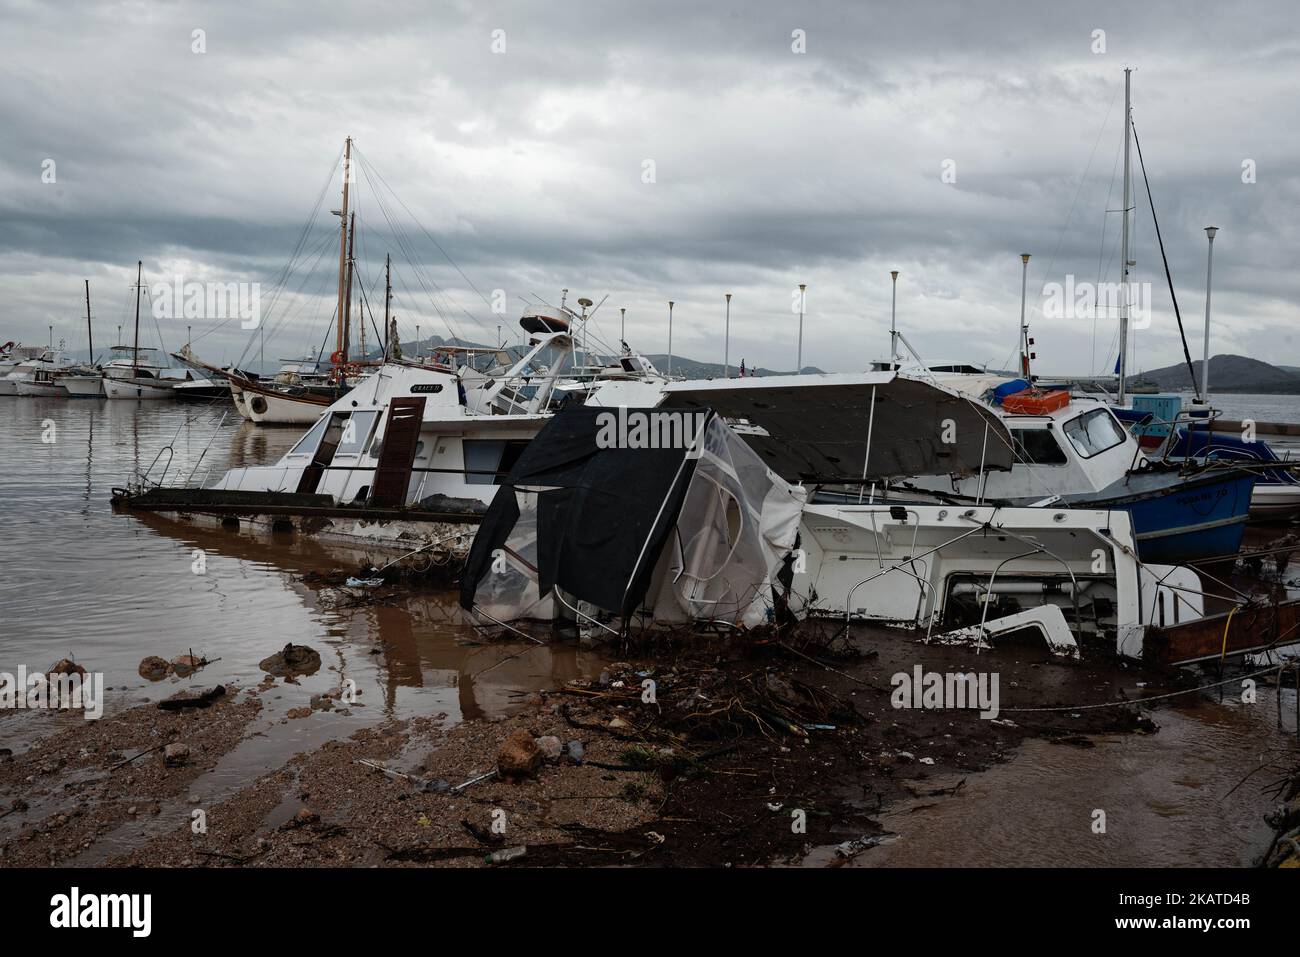 Damages caused by floods are seen at the harbour of Nea Peramos, Greece on November 17, 2017. Flash floods have killed 16 people causing 'biblical damage' as fast-flowing torrents of red mud flooded roads in the western outskirts of the Greek capital, Athens. (Photo by Gerasimos Koilakos/NurPhoto) Stock Photo